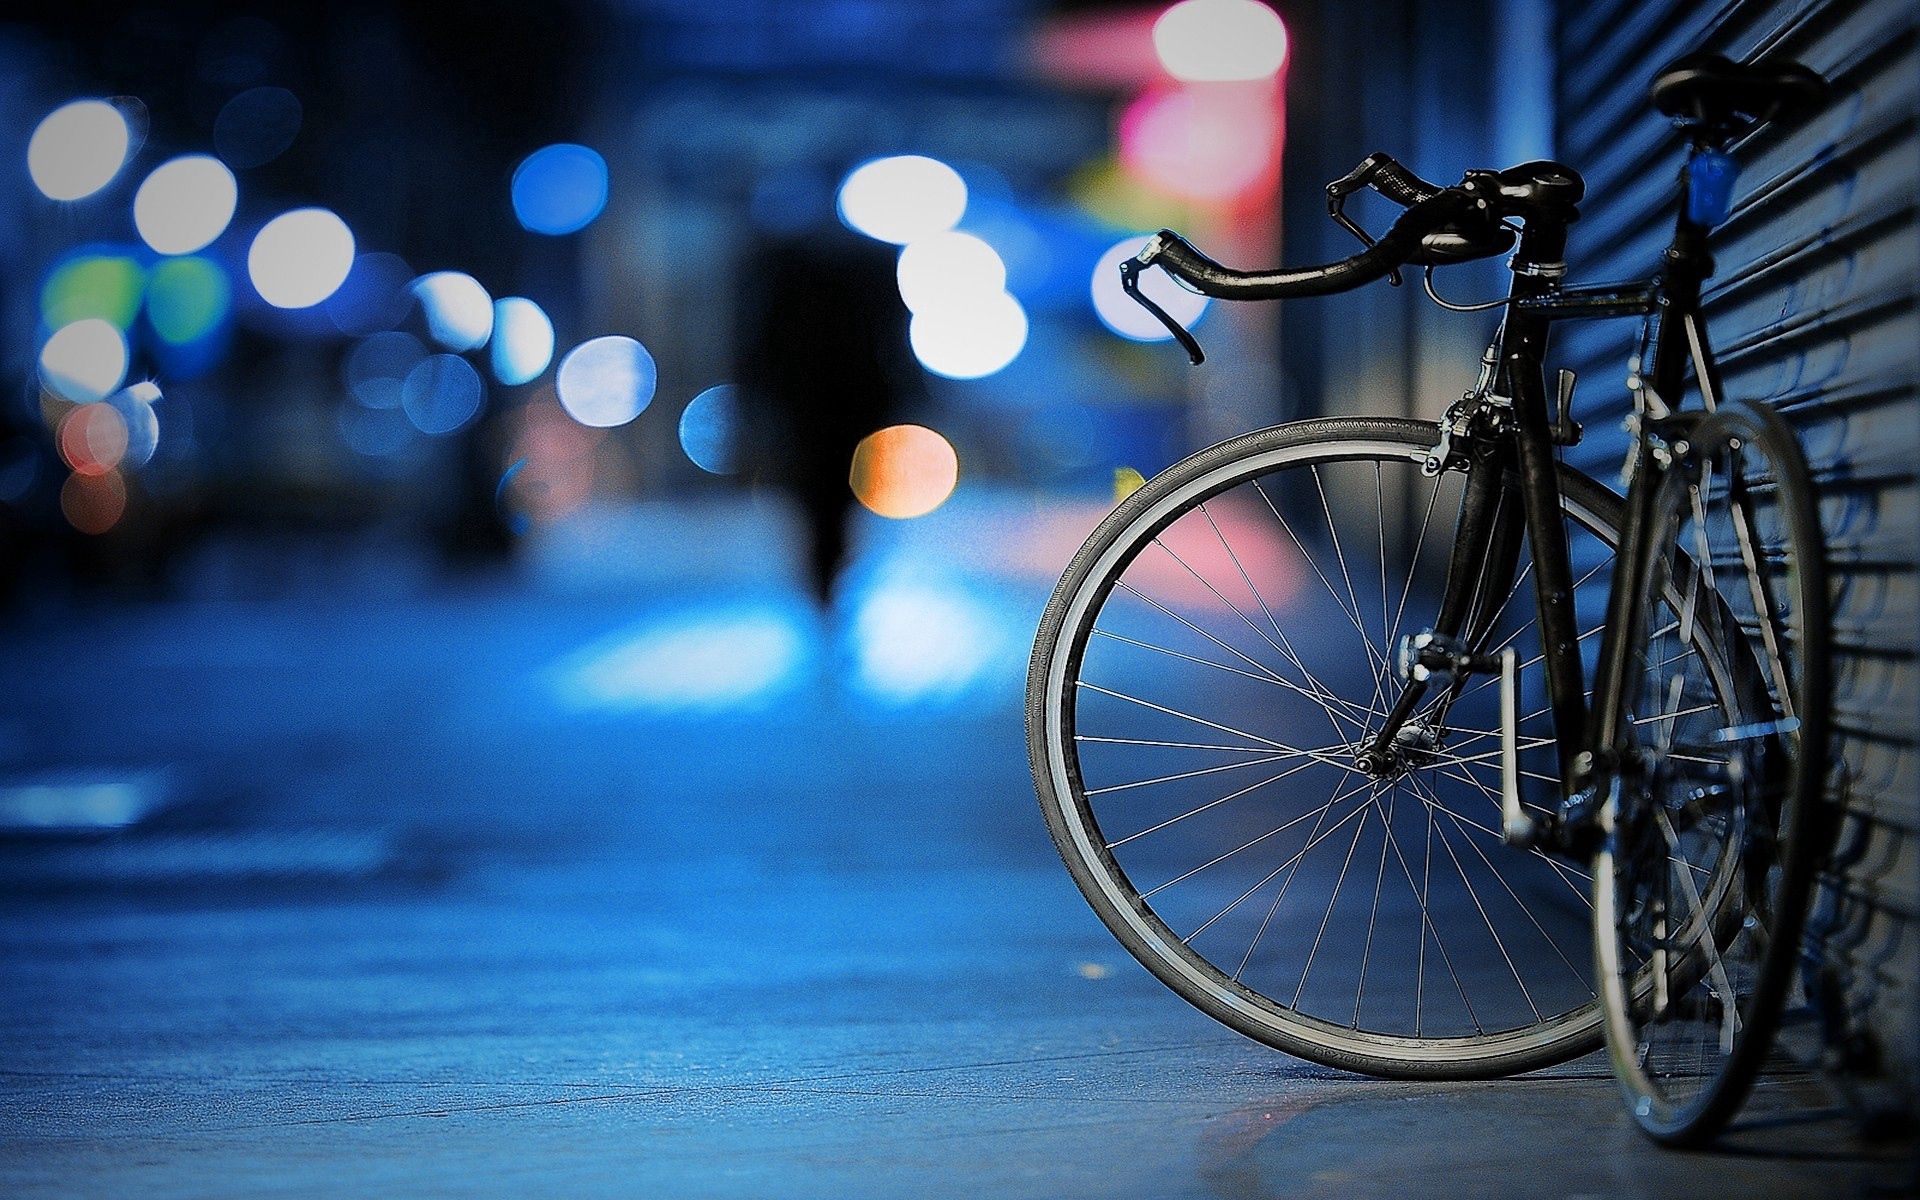 wallpapers bicycle, miscellanea, miscellaneous, wall, evening, street